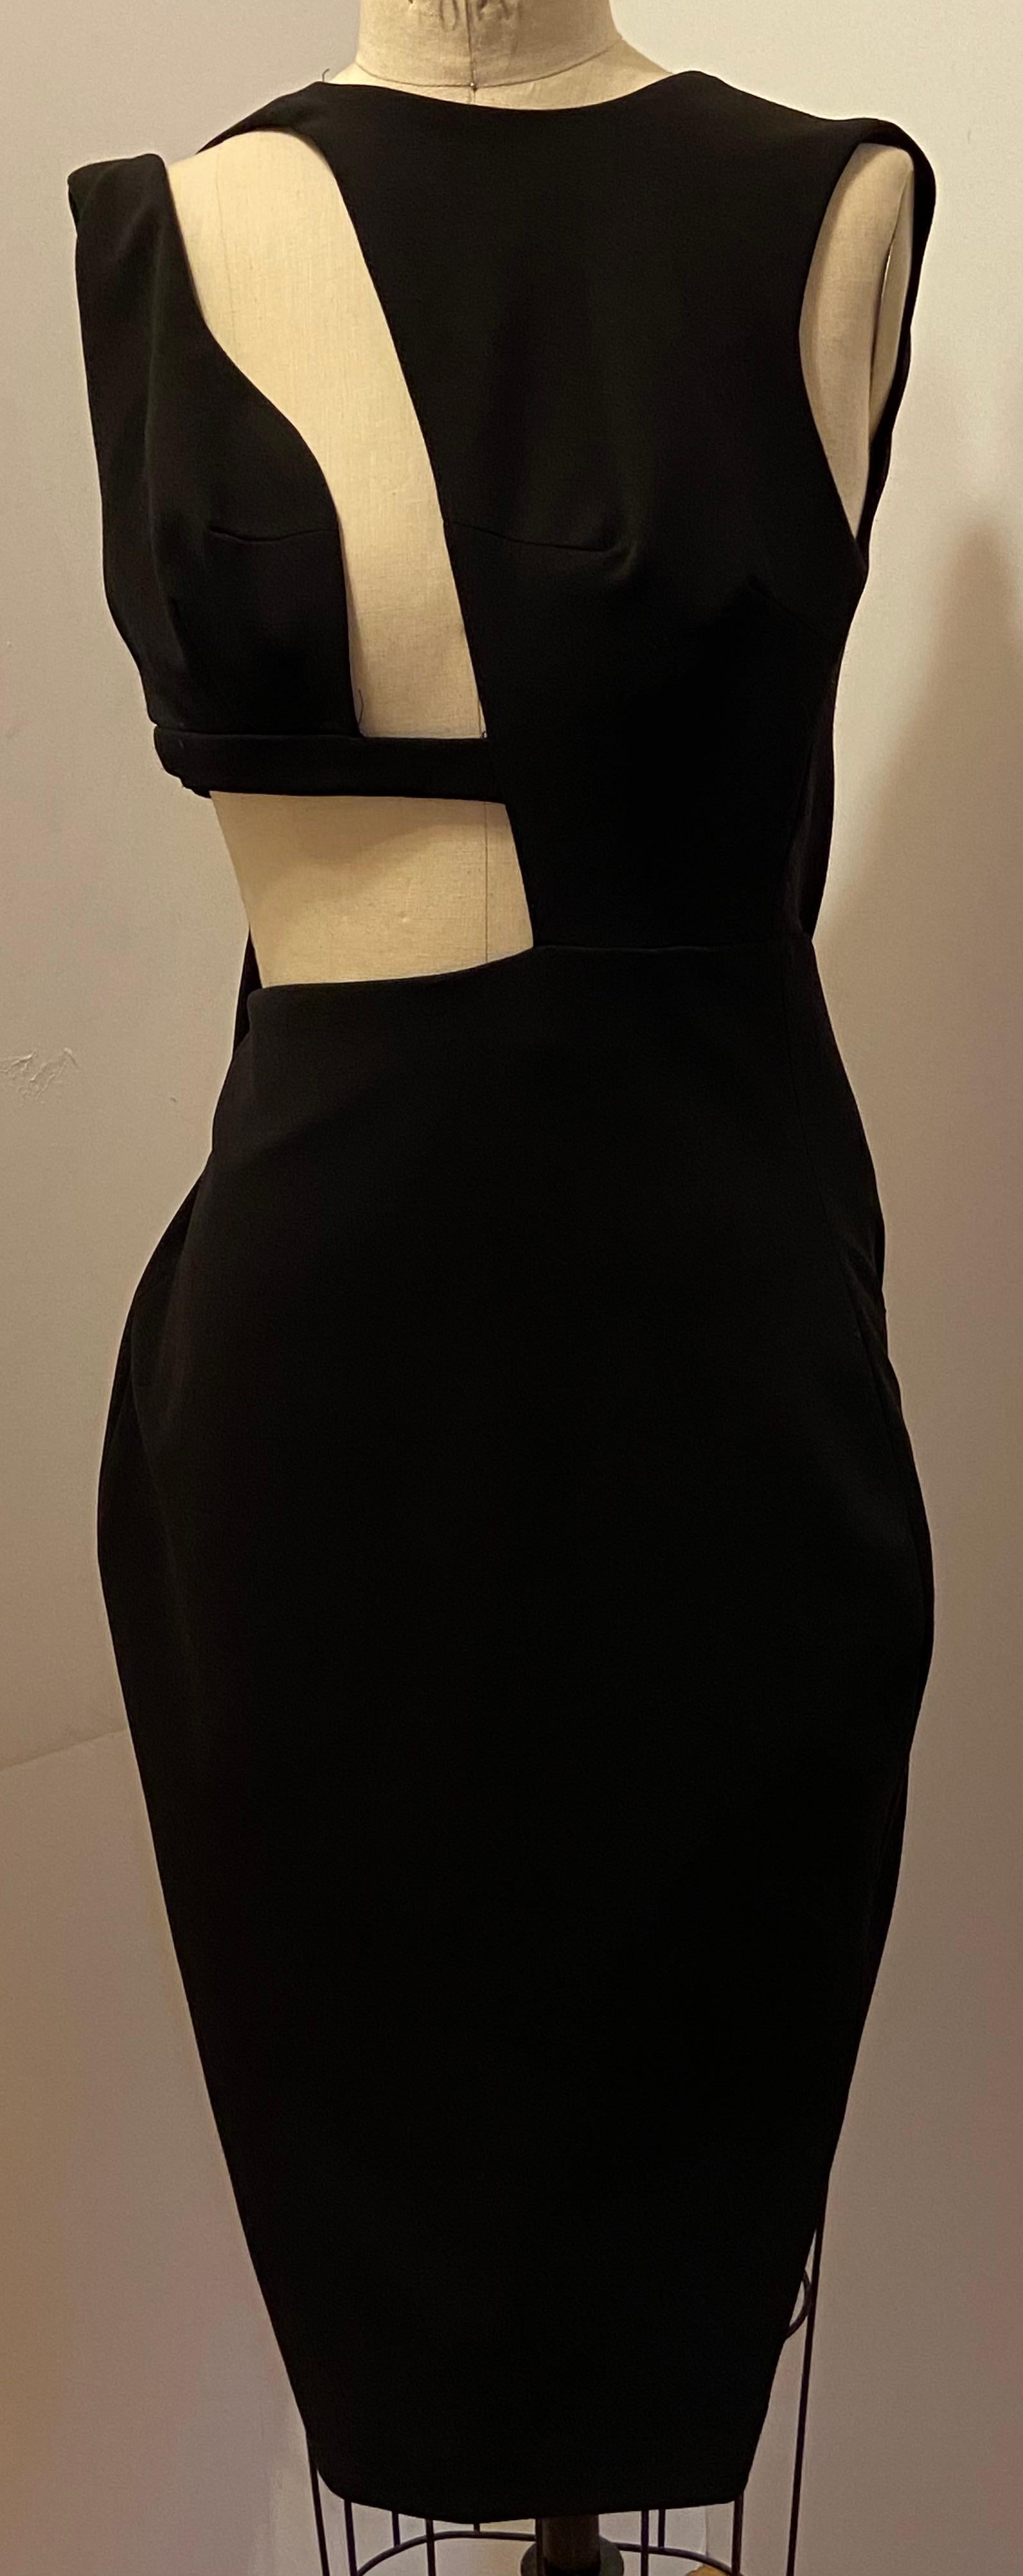 'House of London' Black Abstract Deconstruct Whimsical Evening Cocktail Dress For Sale 1